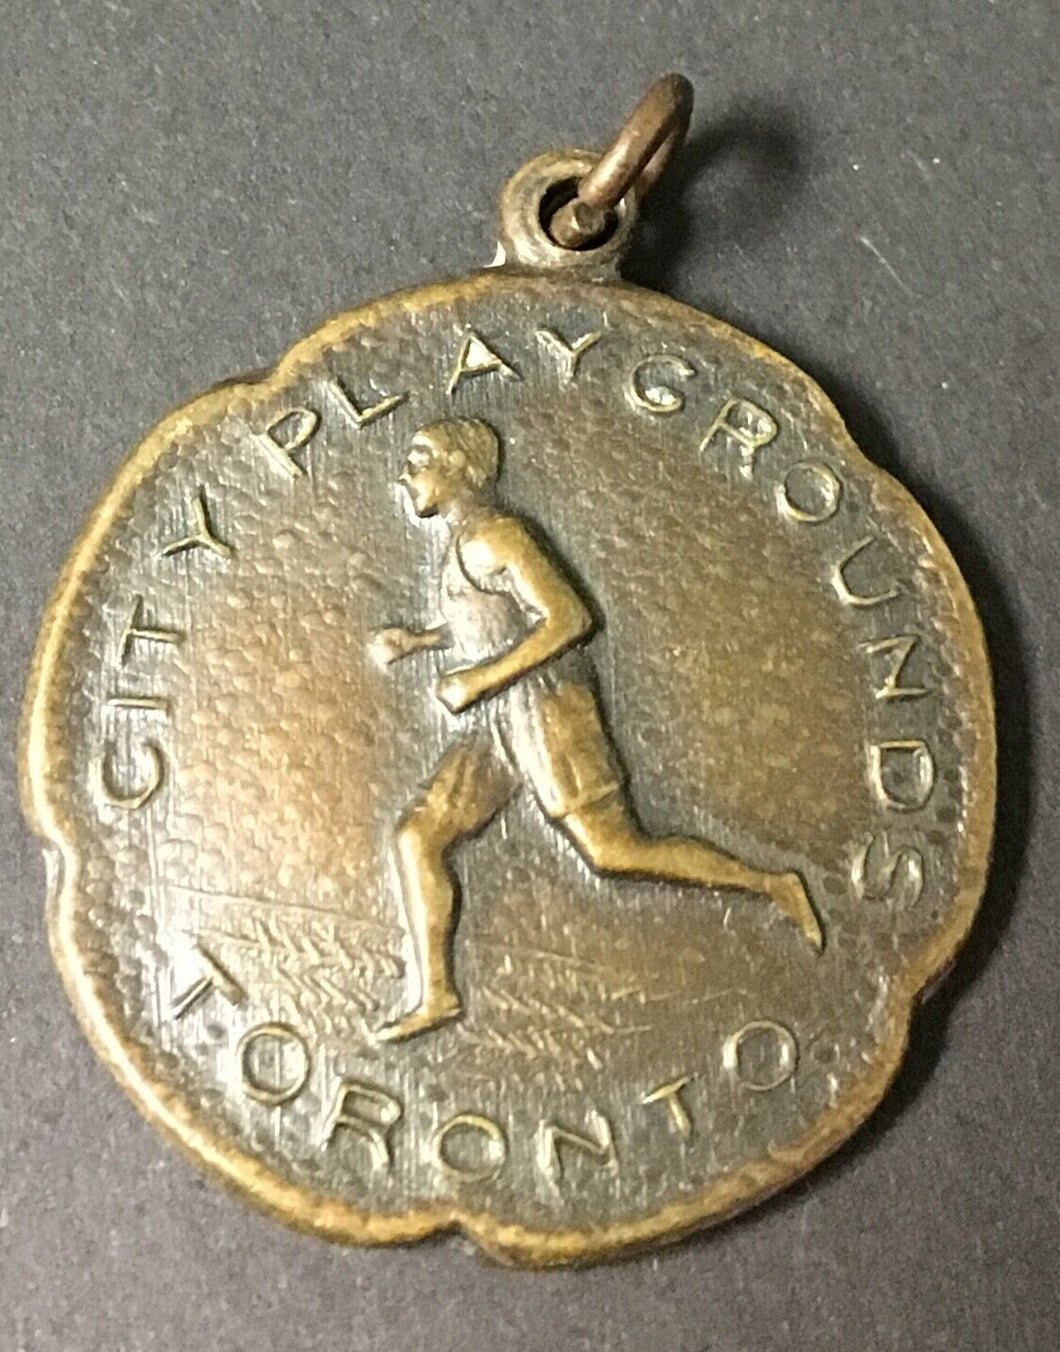 1919 Toronto City Playgrounds Track & Field Medal Rare Antique Charm Vintage